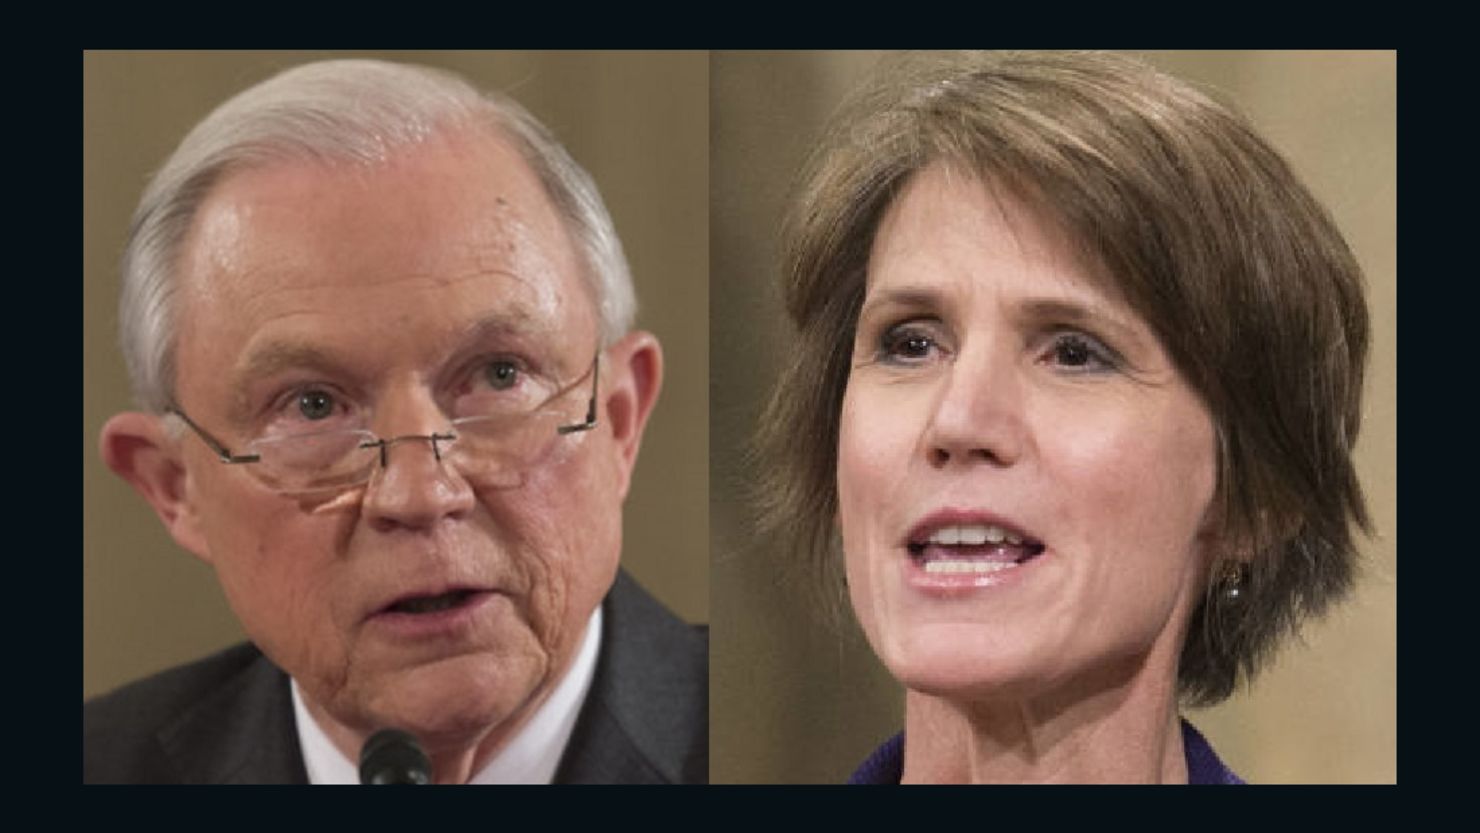 Trump administration Attorney General Jeff Sessions and Obama administration Deputy Attorney General Sally Yates have been key players in issuing and then turning around guidance on private prisons.